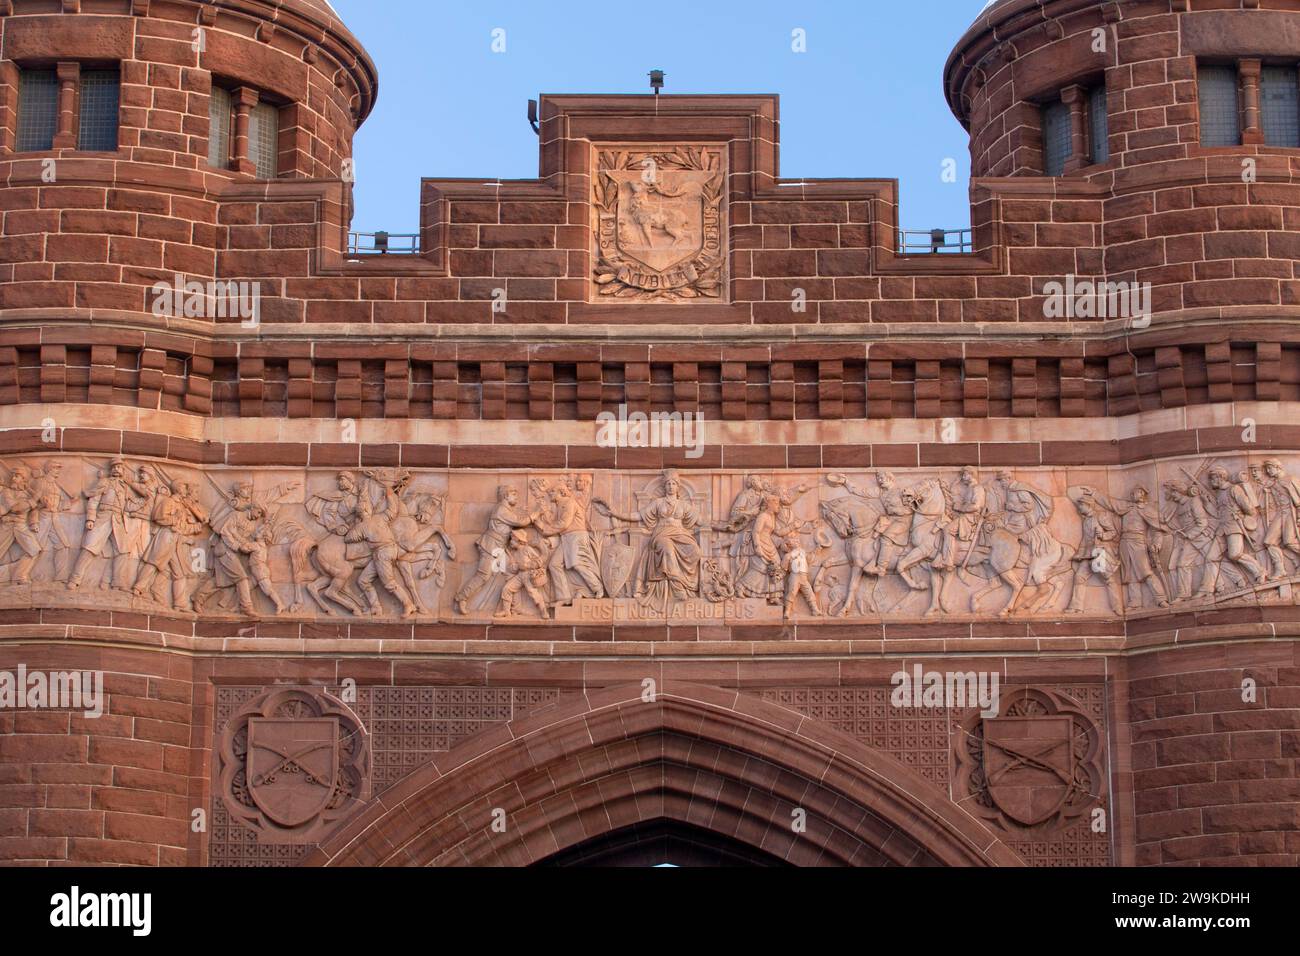 Soldiers and Sailors Memorial Arch, Bushnell Park, Hartford, Connecticut Stock Photo